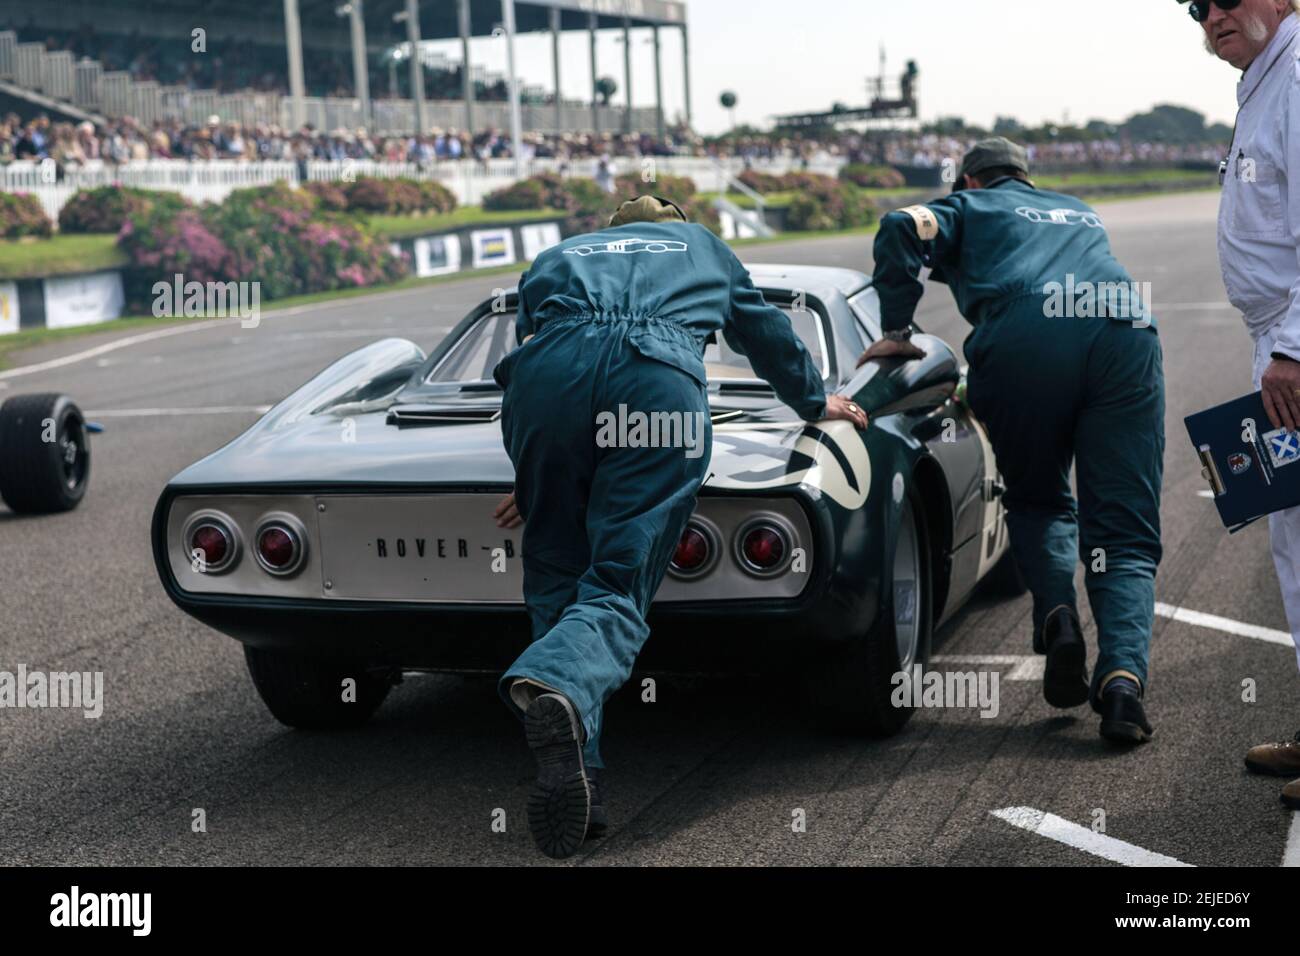 Two man Pushing Rover BRM Gas Turbine Race Car beim Goodwood Revival, West Sussex, England. Stockfoto